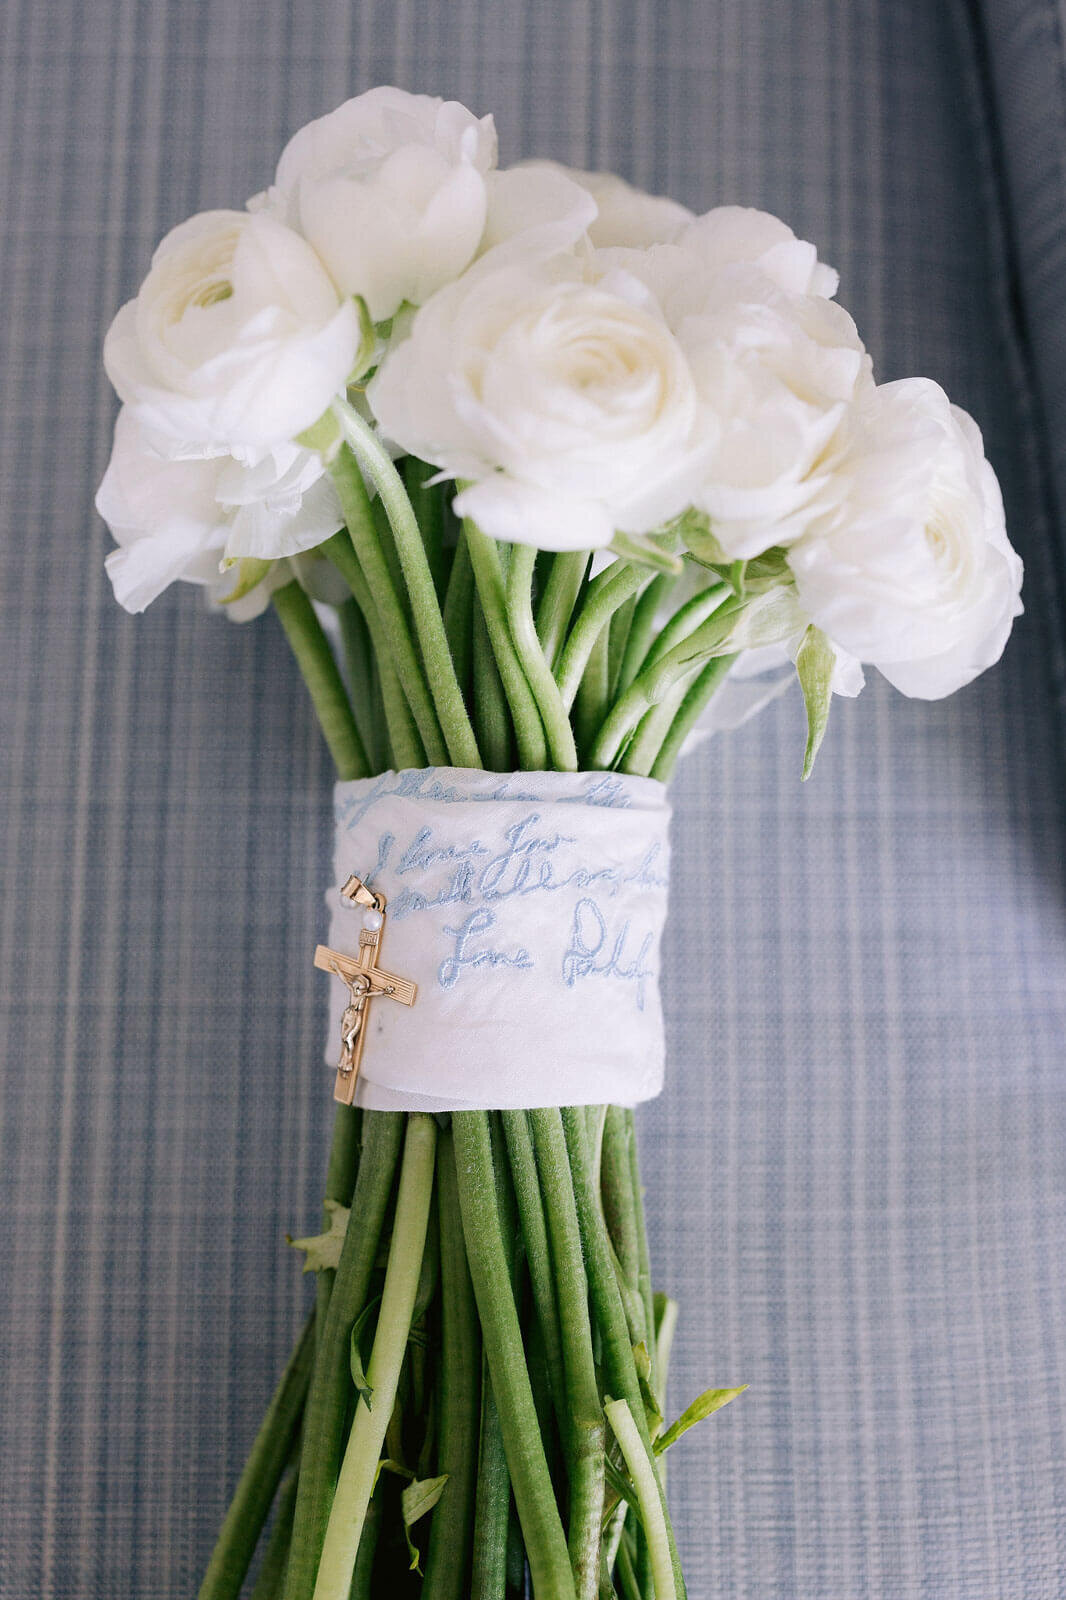 A bouquet of white flowers is tied with an embroidered white cloth with a crucifix attached, in Wianno Club, Cape Cod, MA.